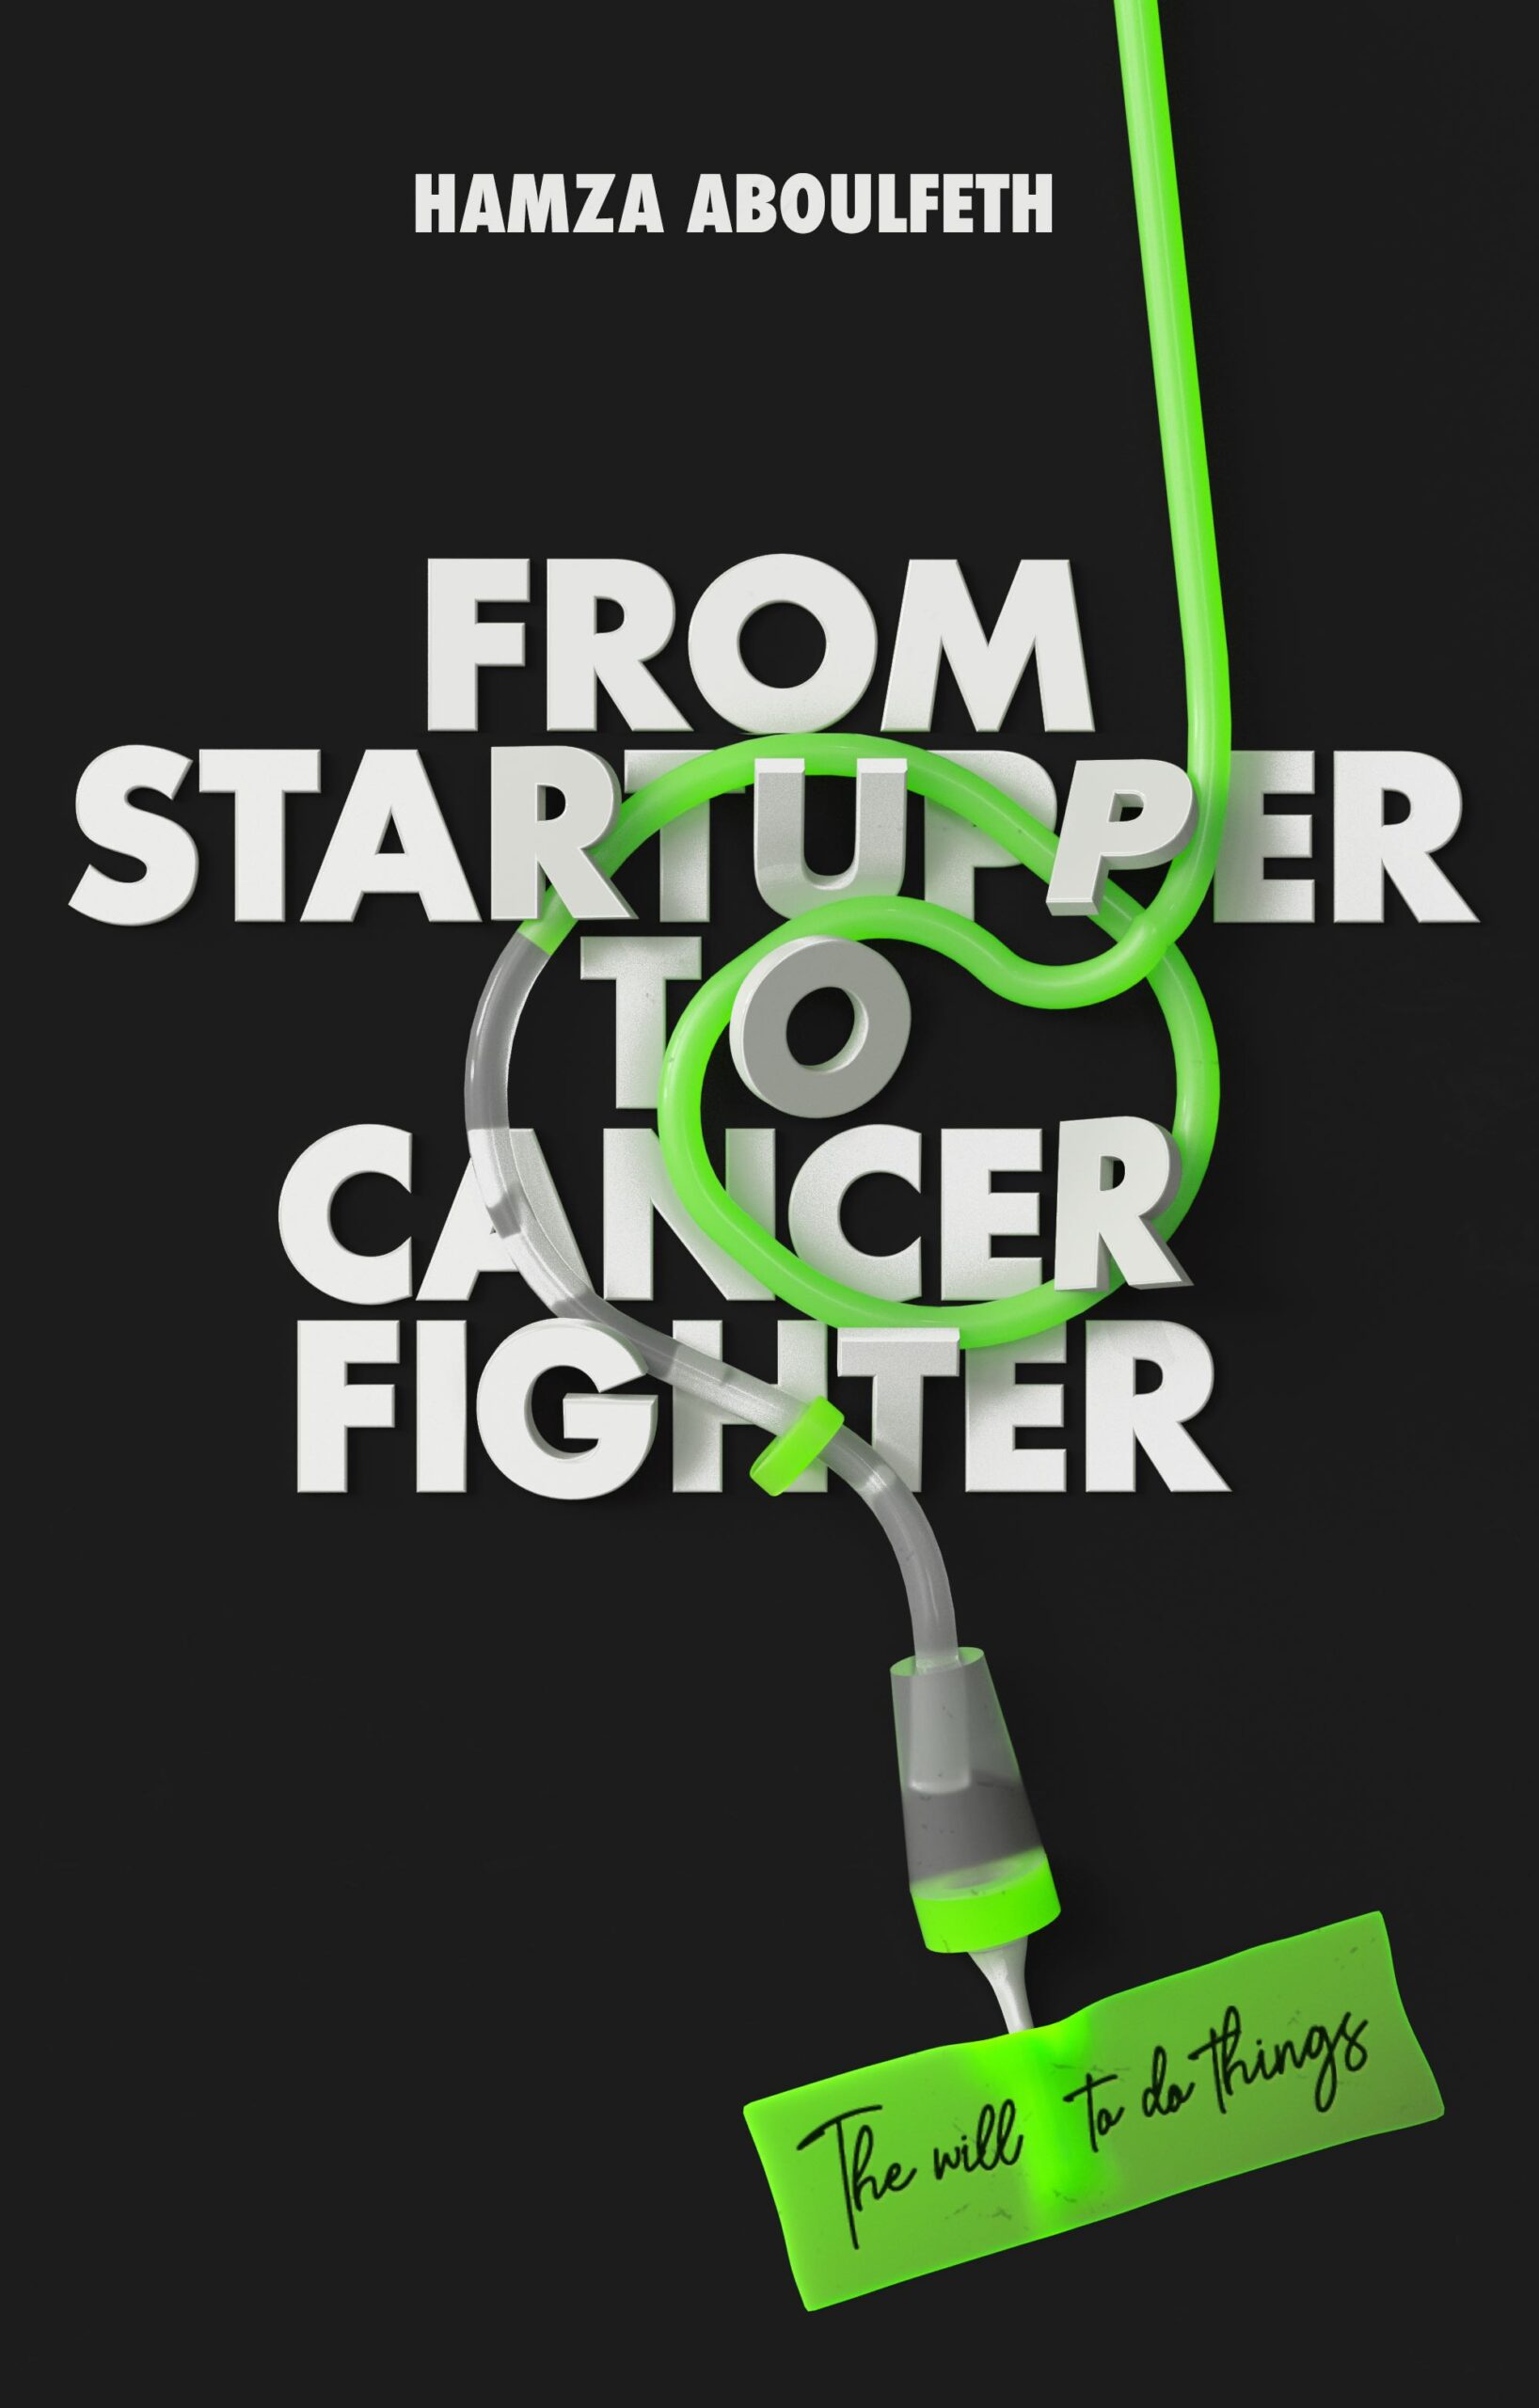 FREE: From Startupper to Cancer Fighter by Hamza Aboulfeth